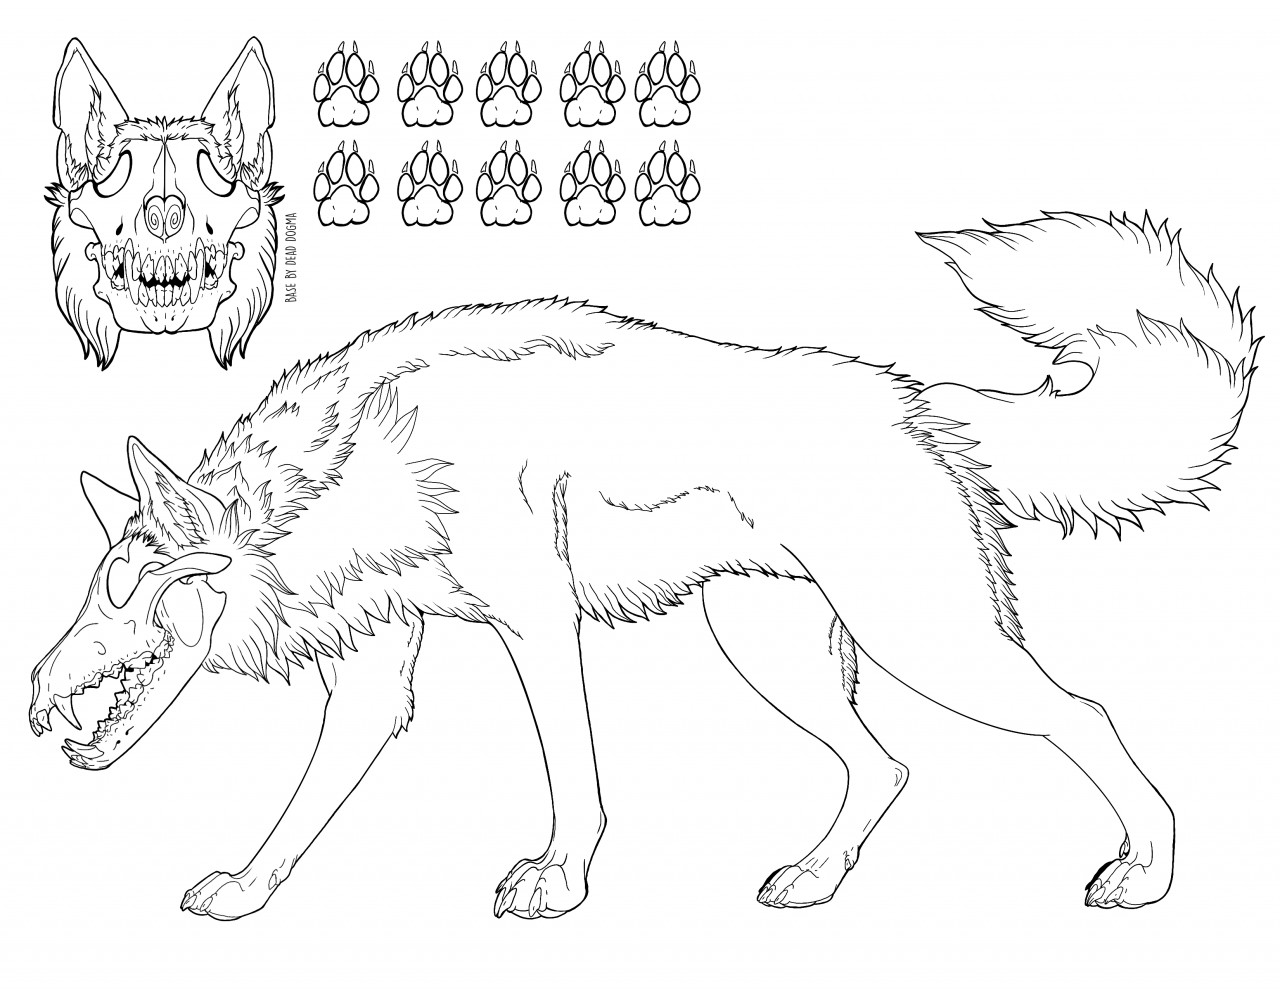 FREE TO USE Skull-Wolf/Canine Feral Base. 